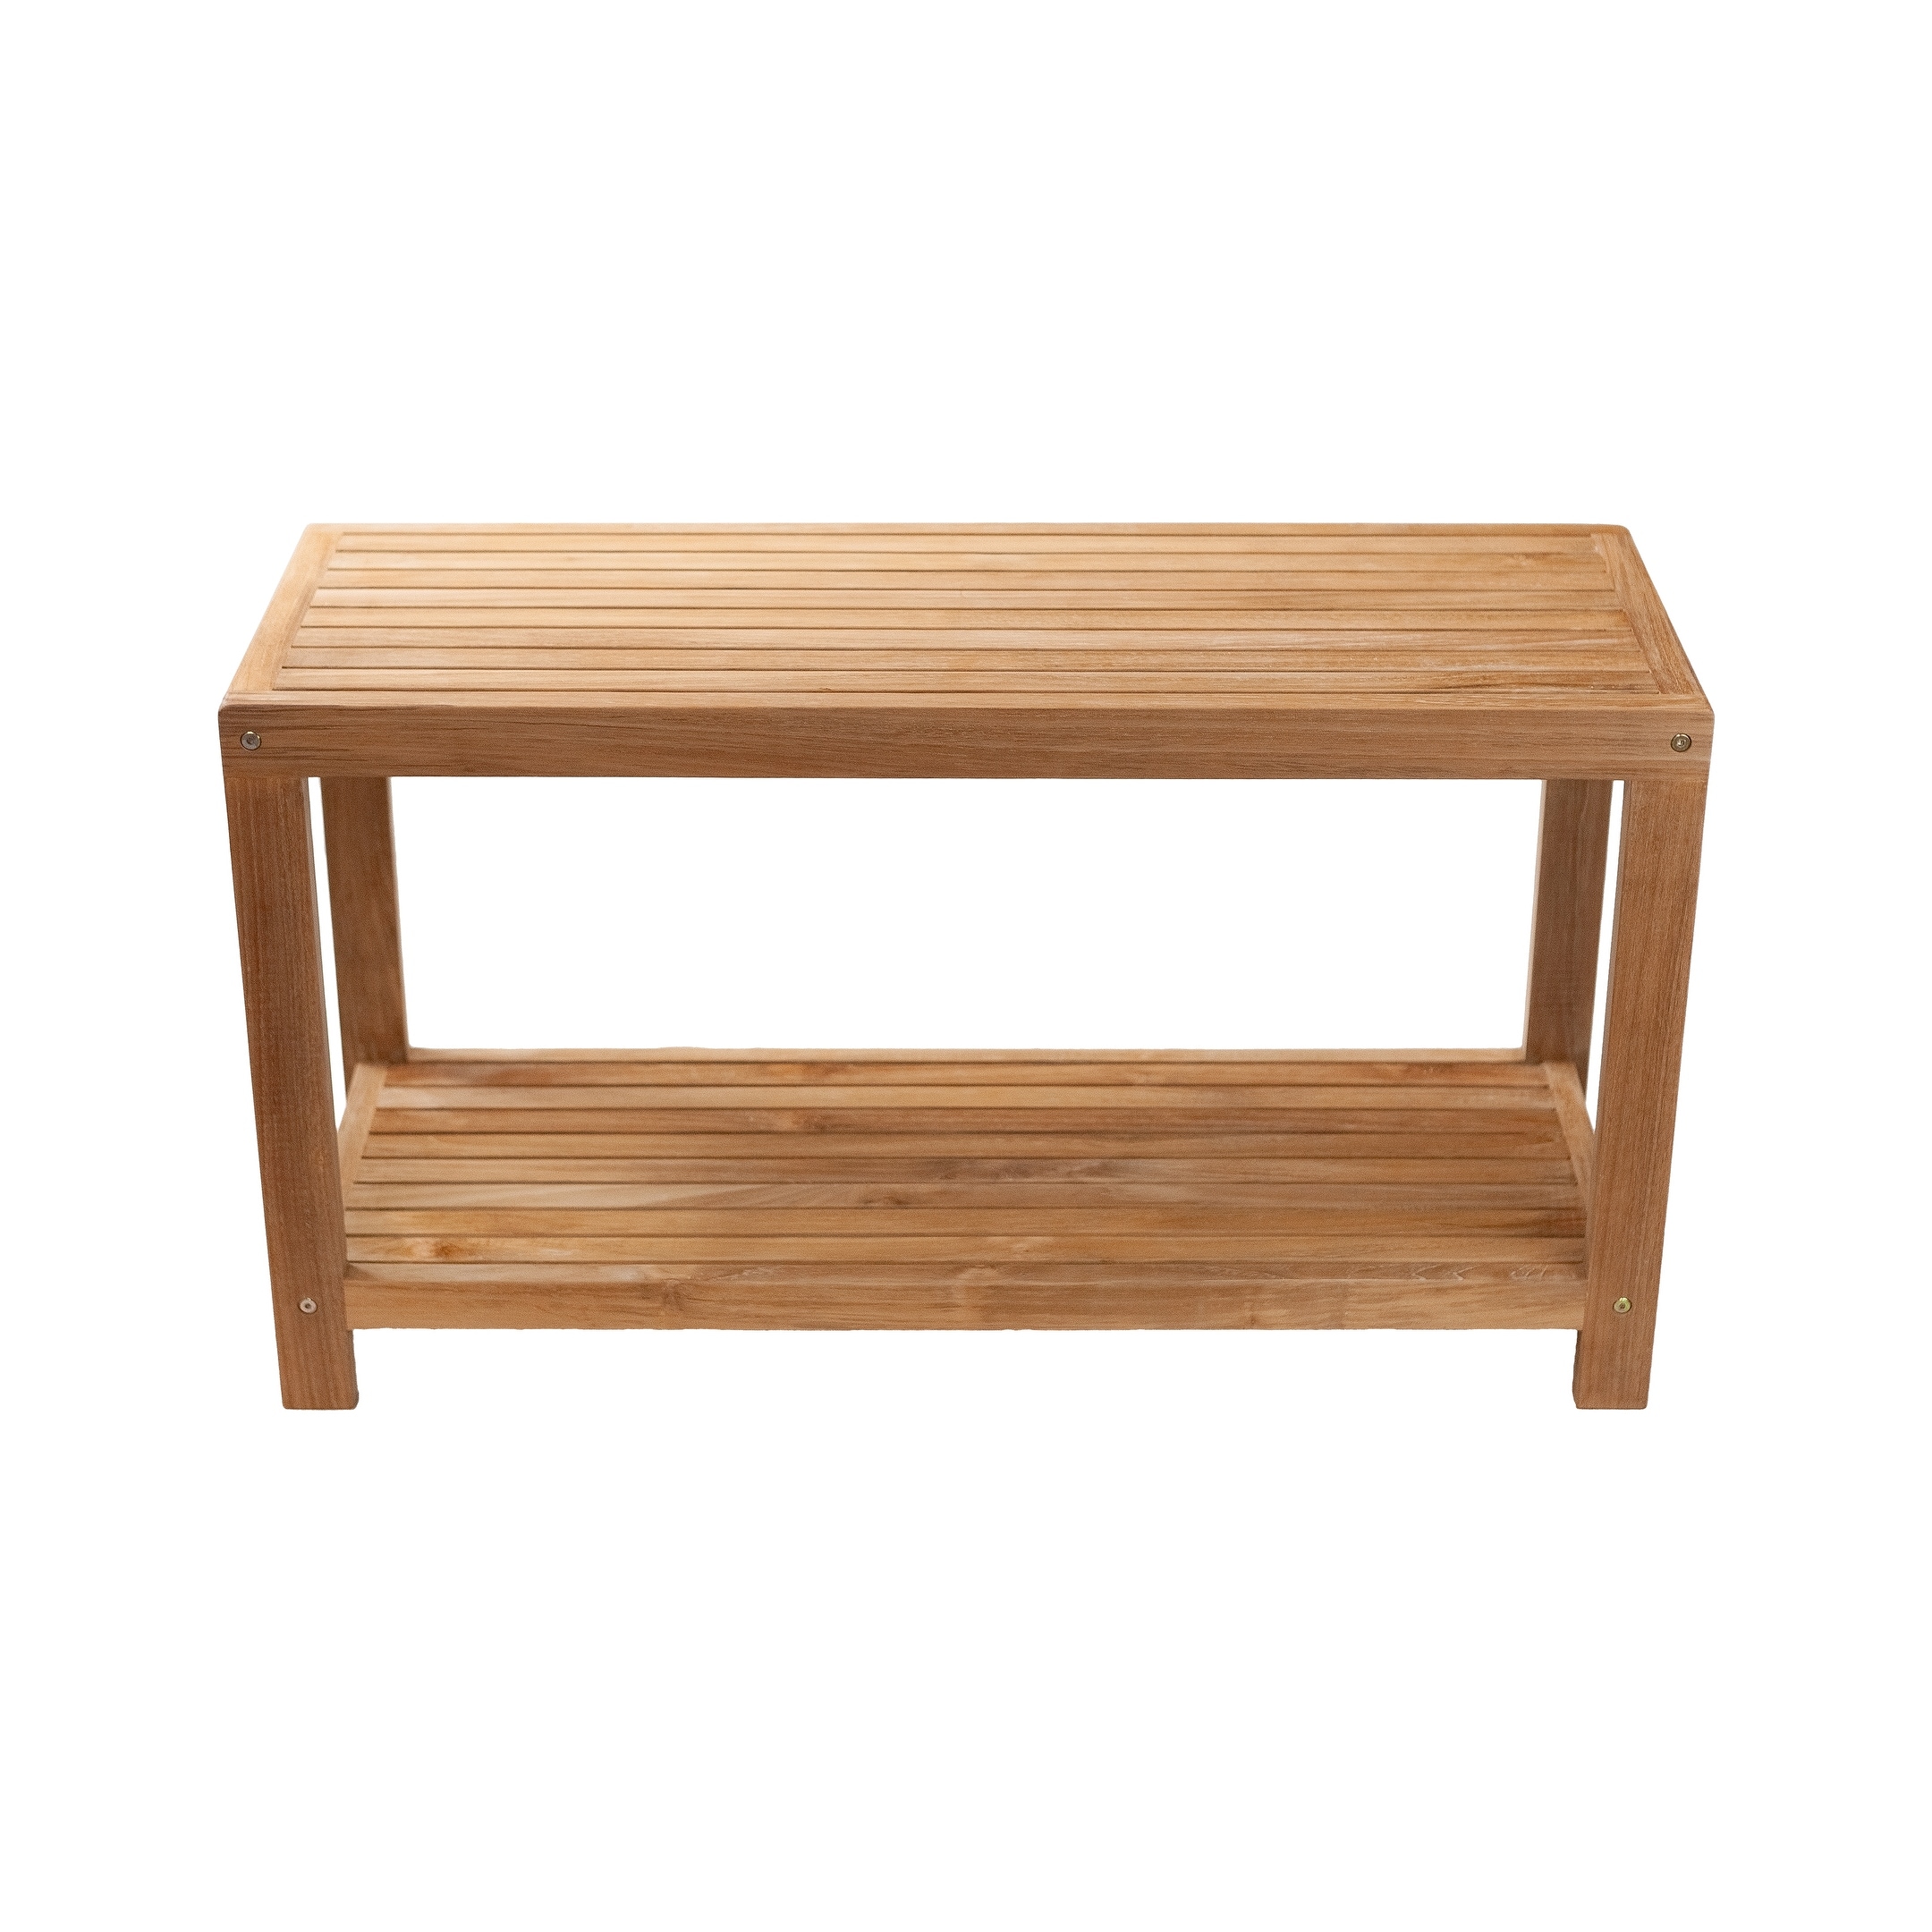 https://ak1.ostkcdn.com/images/products/is/images/direct/aab89d262c879543972bf06d47def32334ef486b/Nordic-Style-Natural-Teak-Spa-Bench-with-Shelf-35%E2%80%B3.jpg